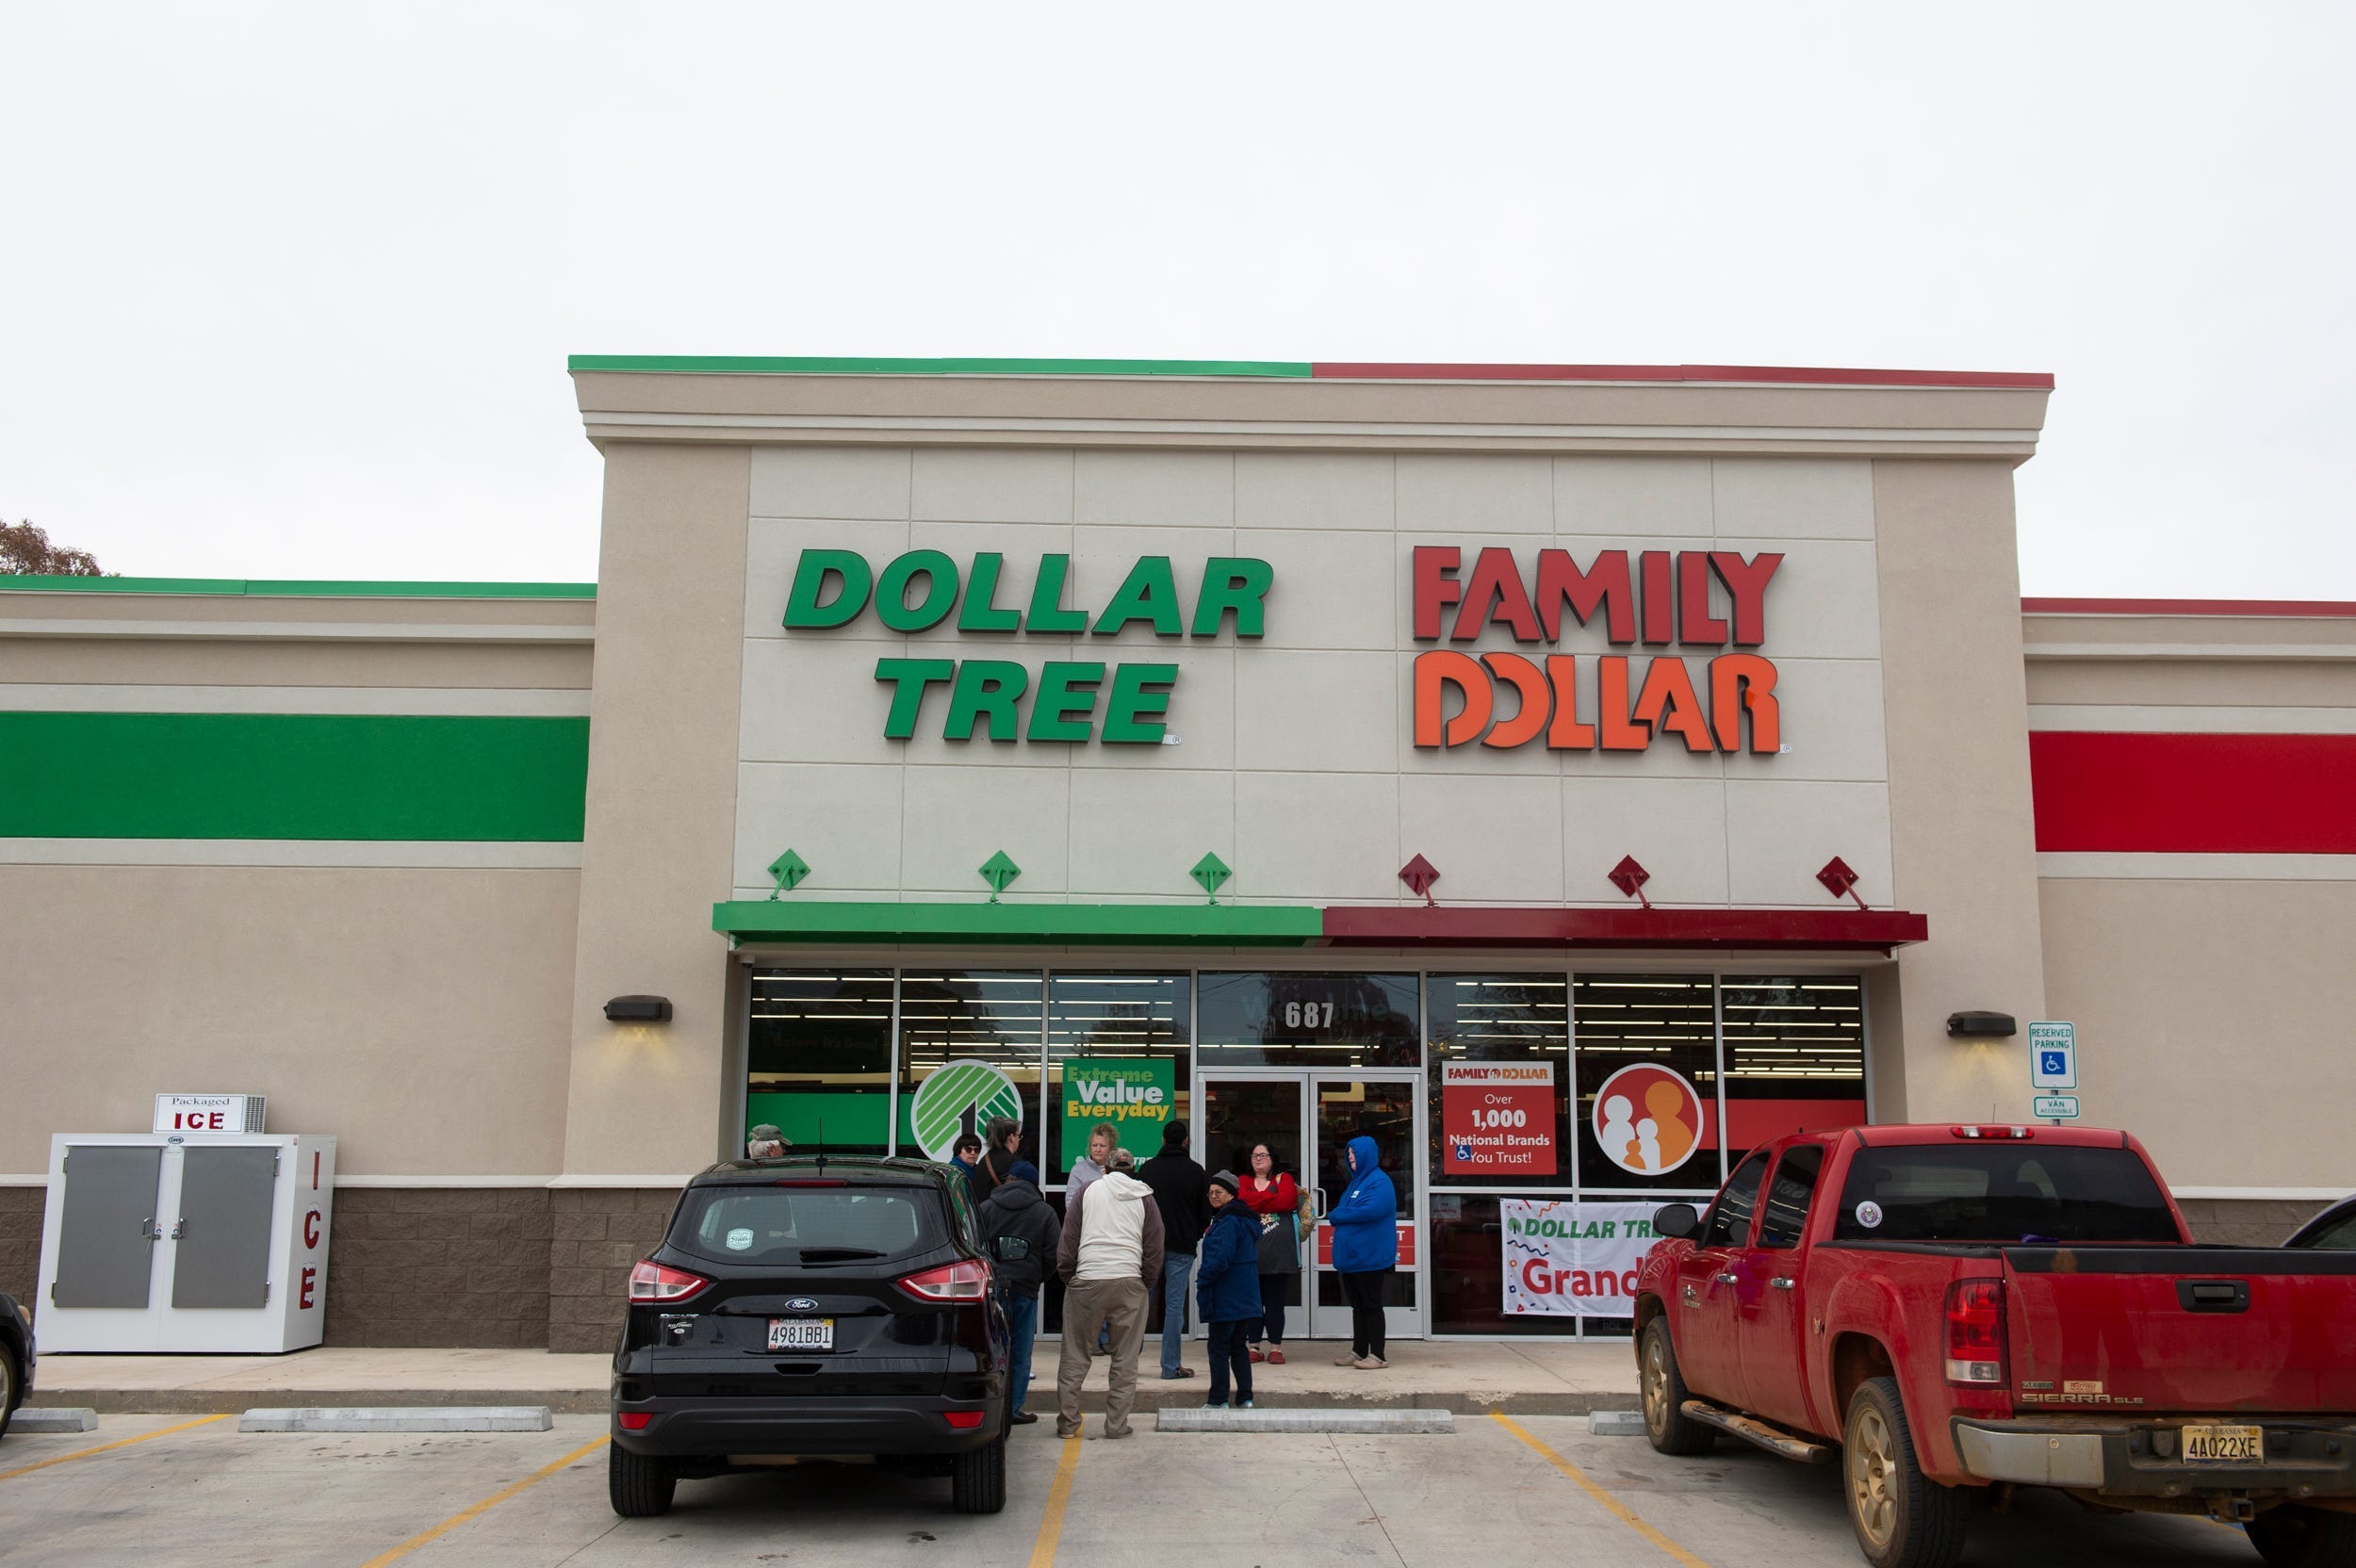 $1, plus $6 more: when will your local dollar tree start selling $7 items?